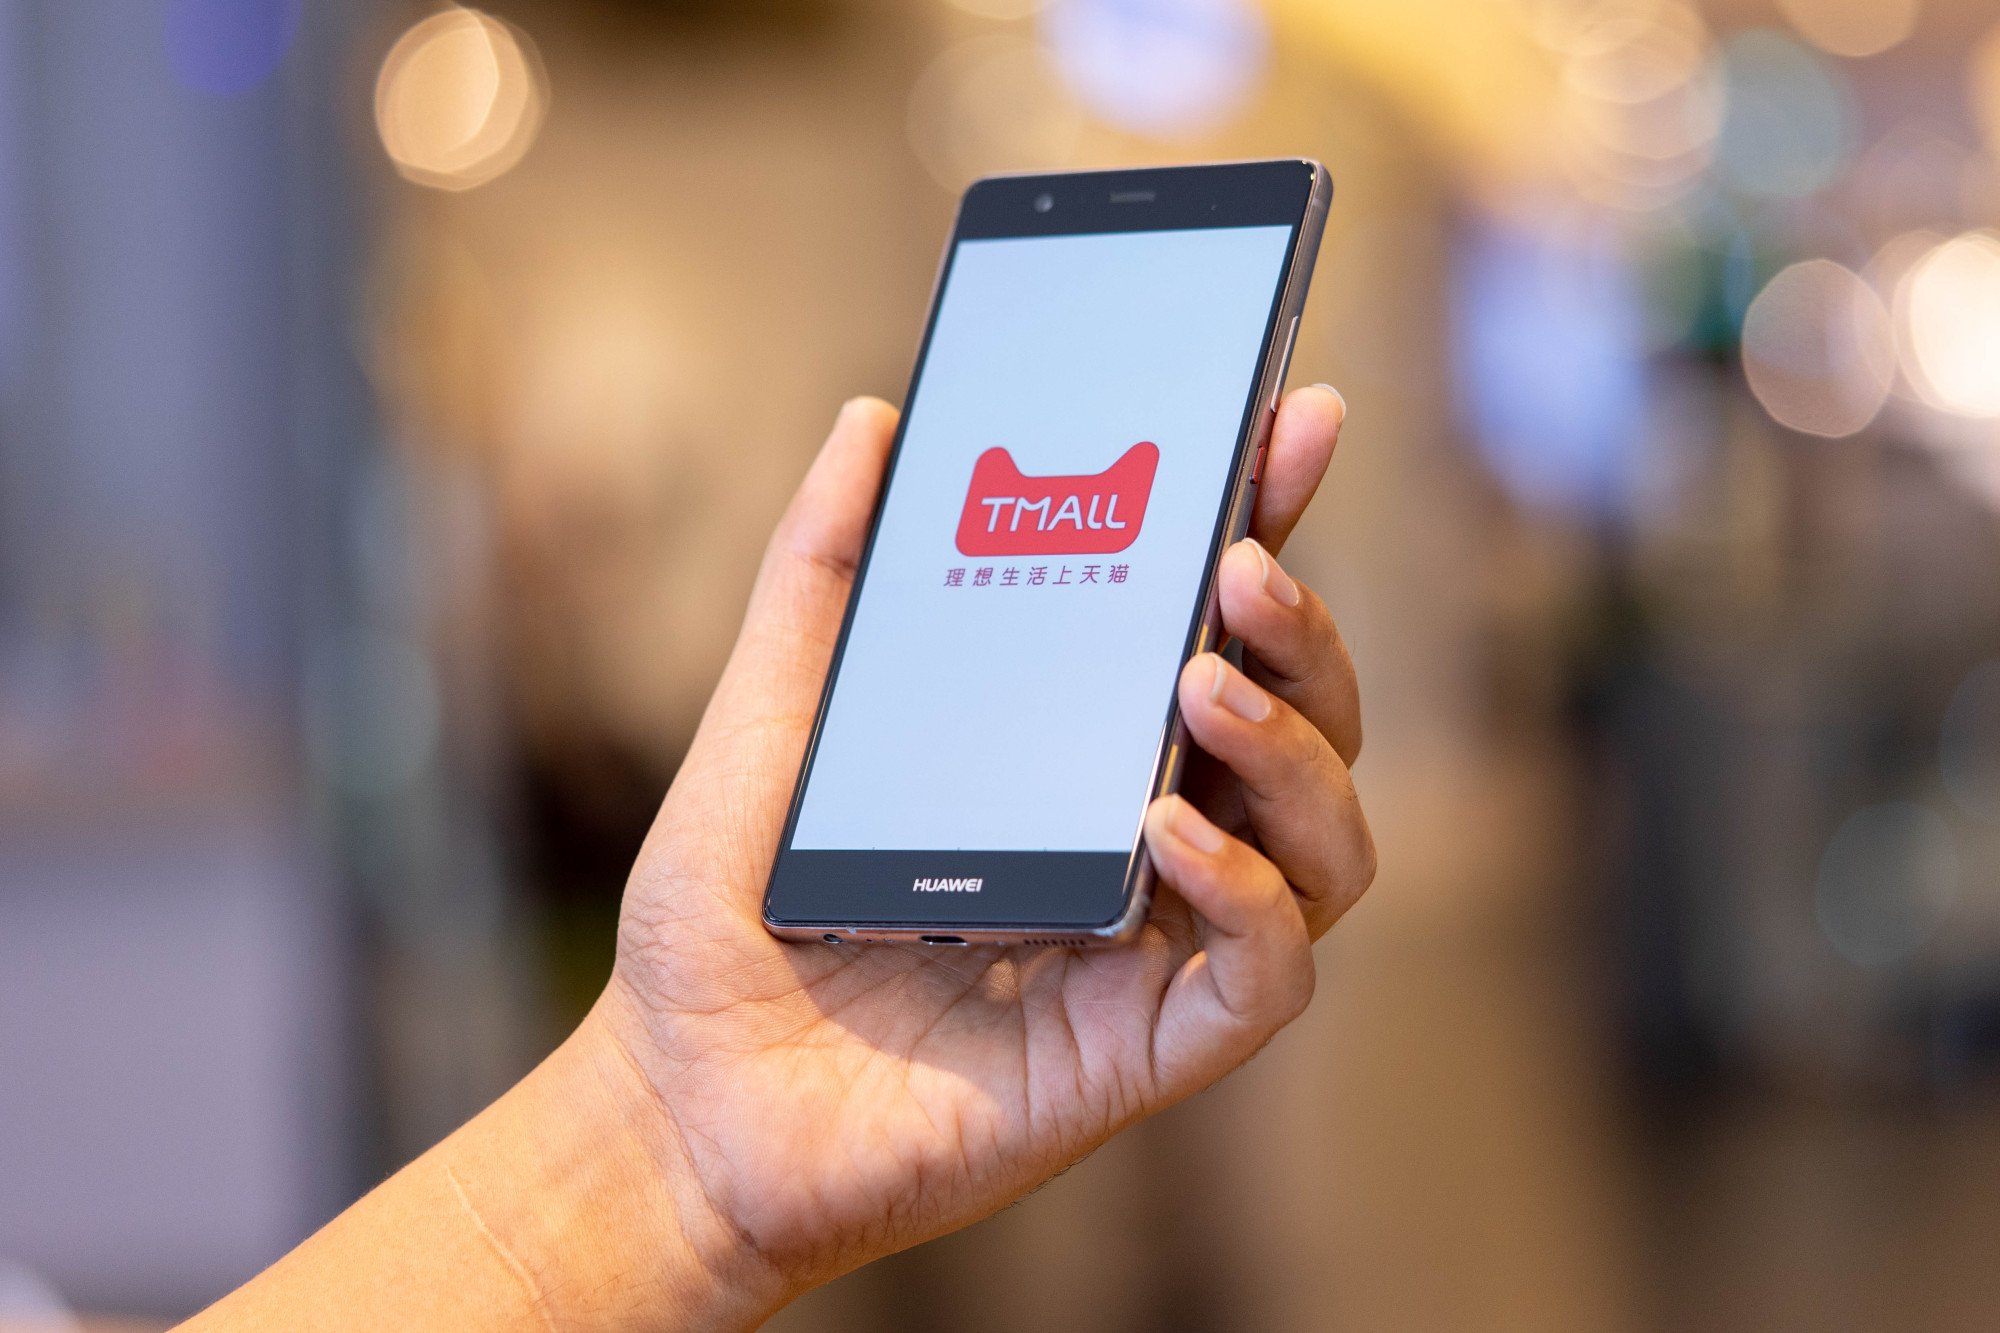 The Tmall app is a popular marketplace for international and major Chinese businesses to sell brand-name goods to domestic consumers. Photo: Shutterstock